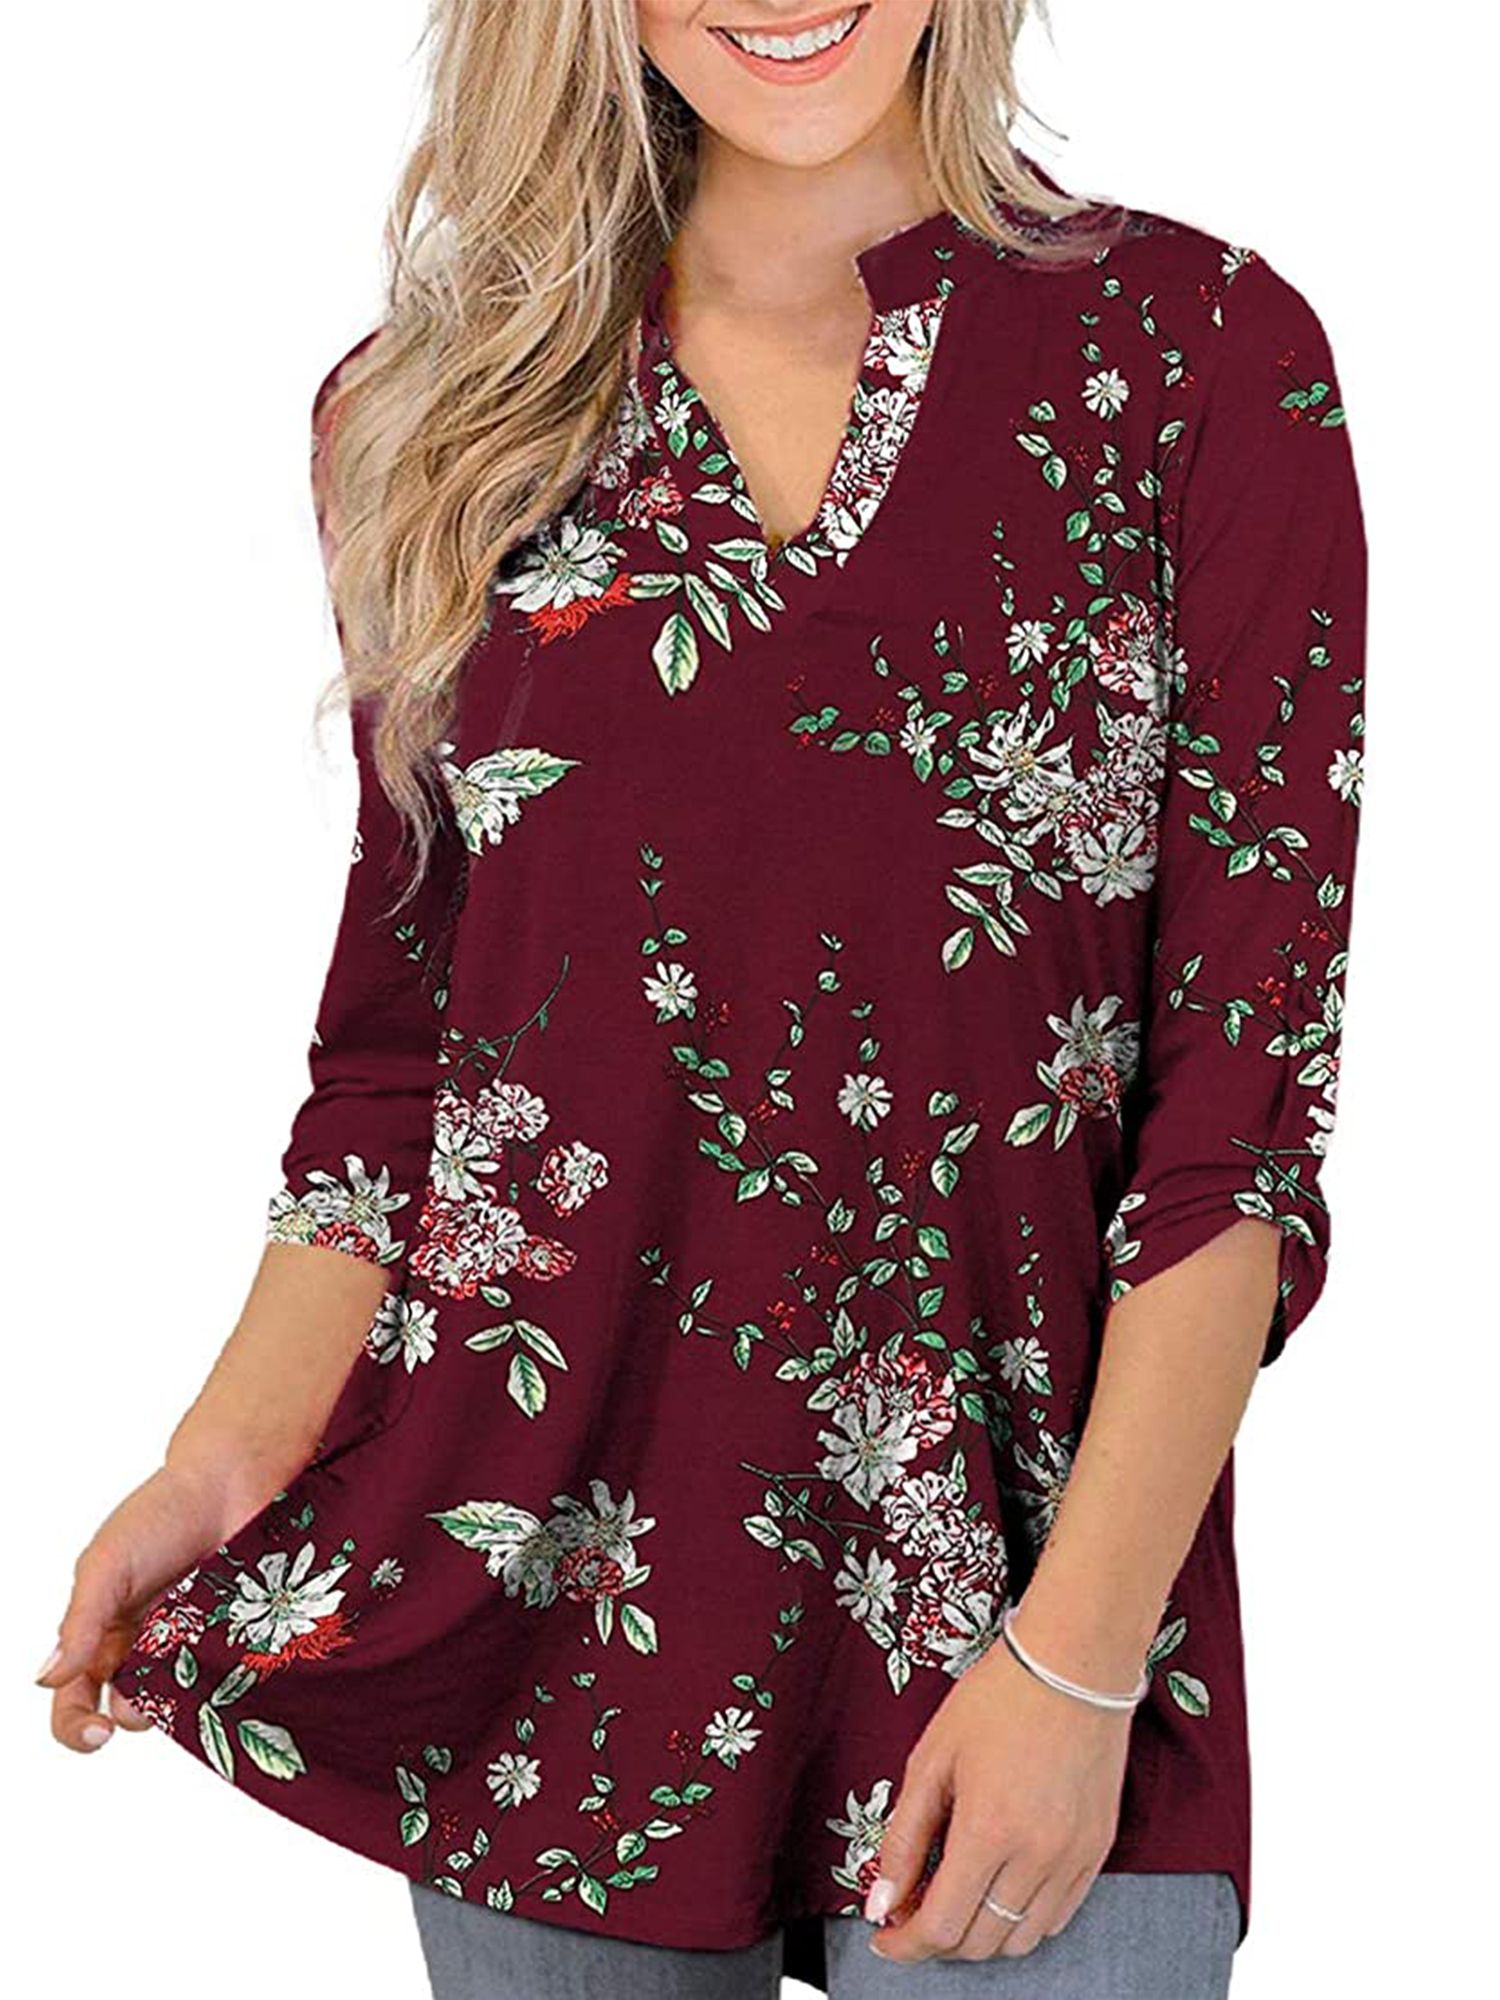 Plus Size Tops for Women 3/4 Roll Sleeve Floral Tunic Shirt Casual V ...